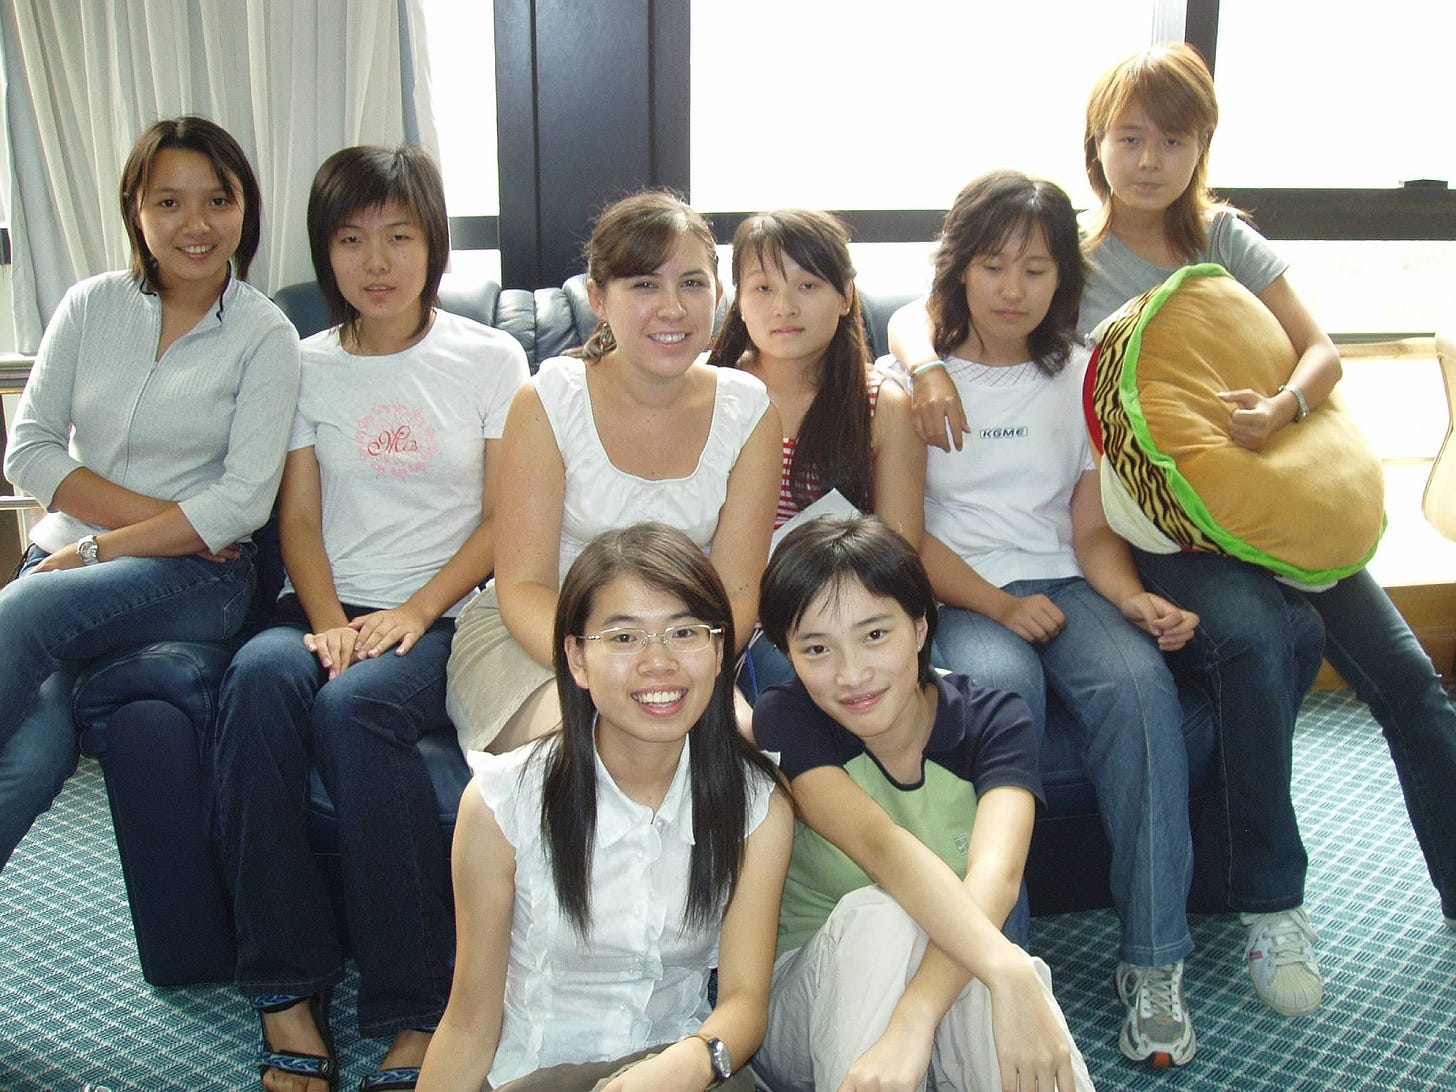 a group of Asian girls sit together on a couch in an office